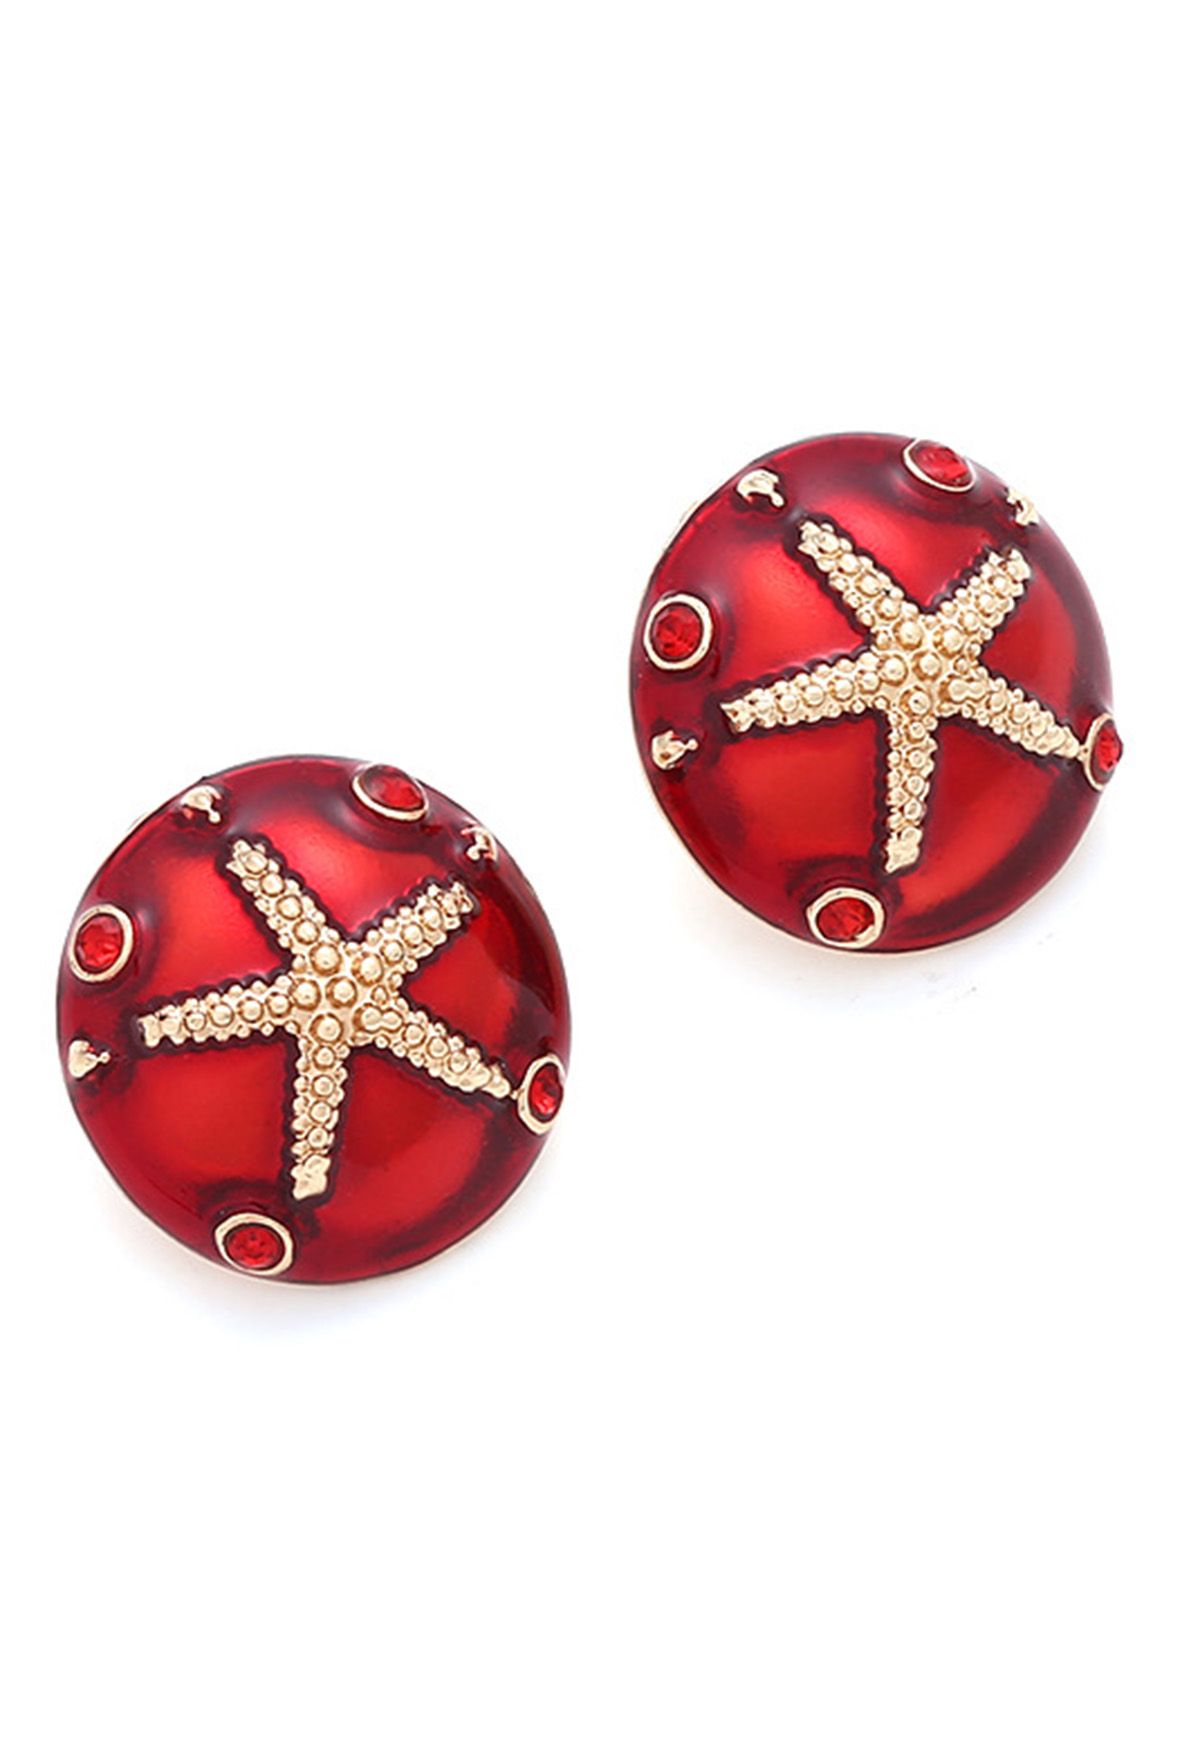 Rounded Starfish Oil Spill Earrings in Red